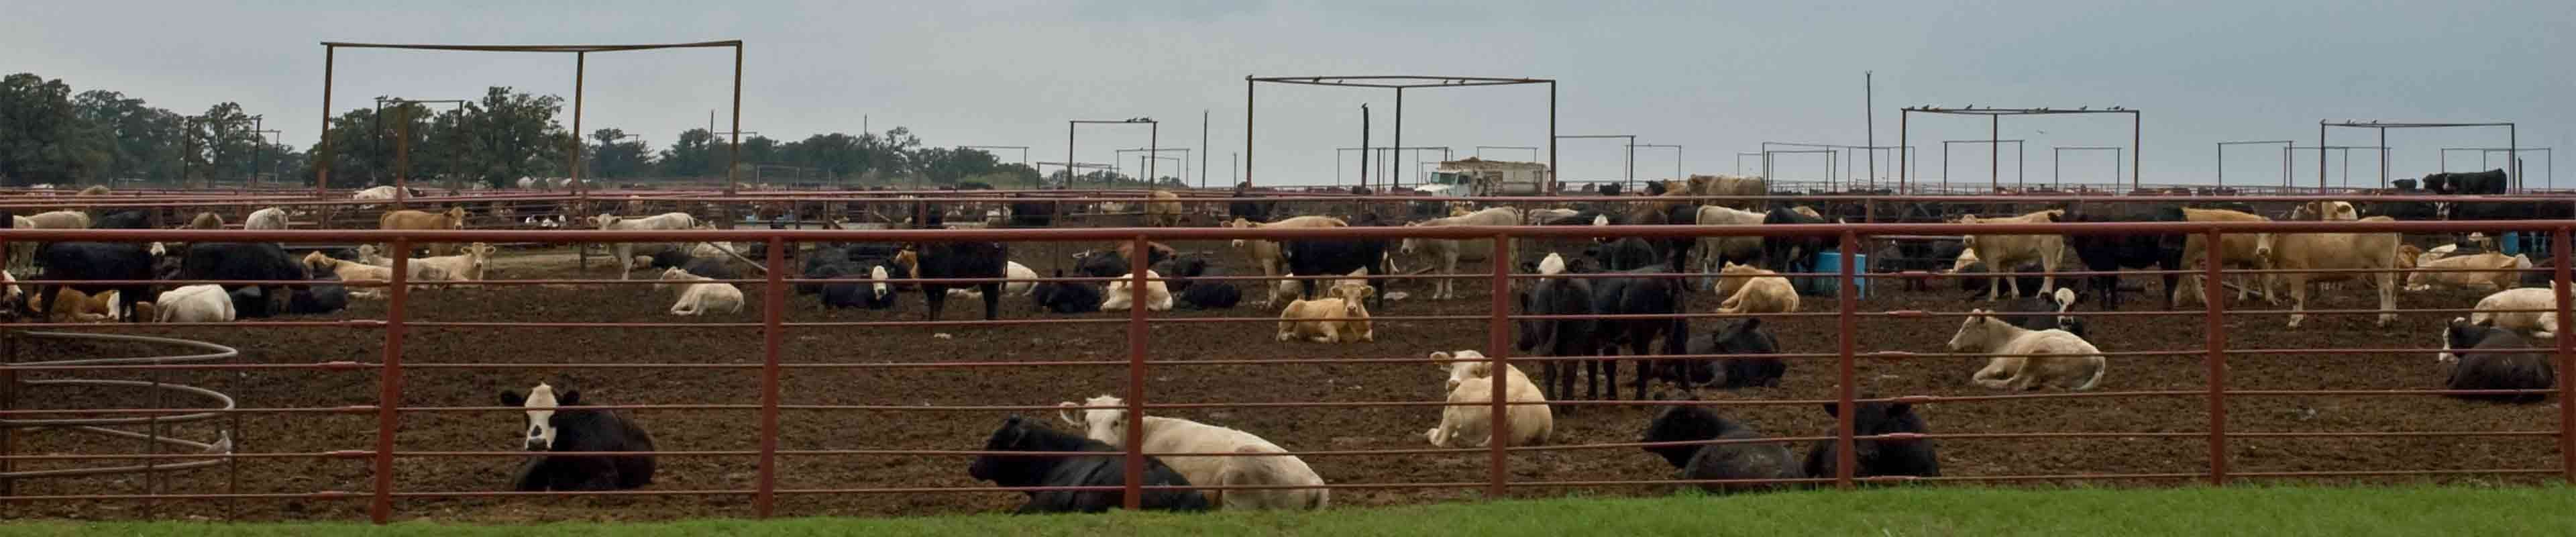 View of a cattle feed lot -Website